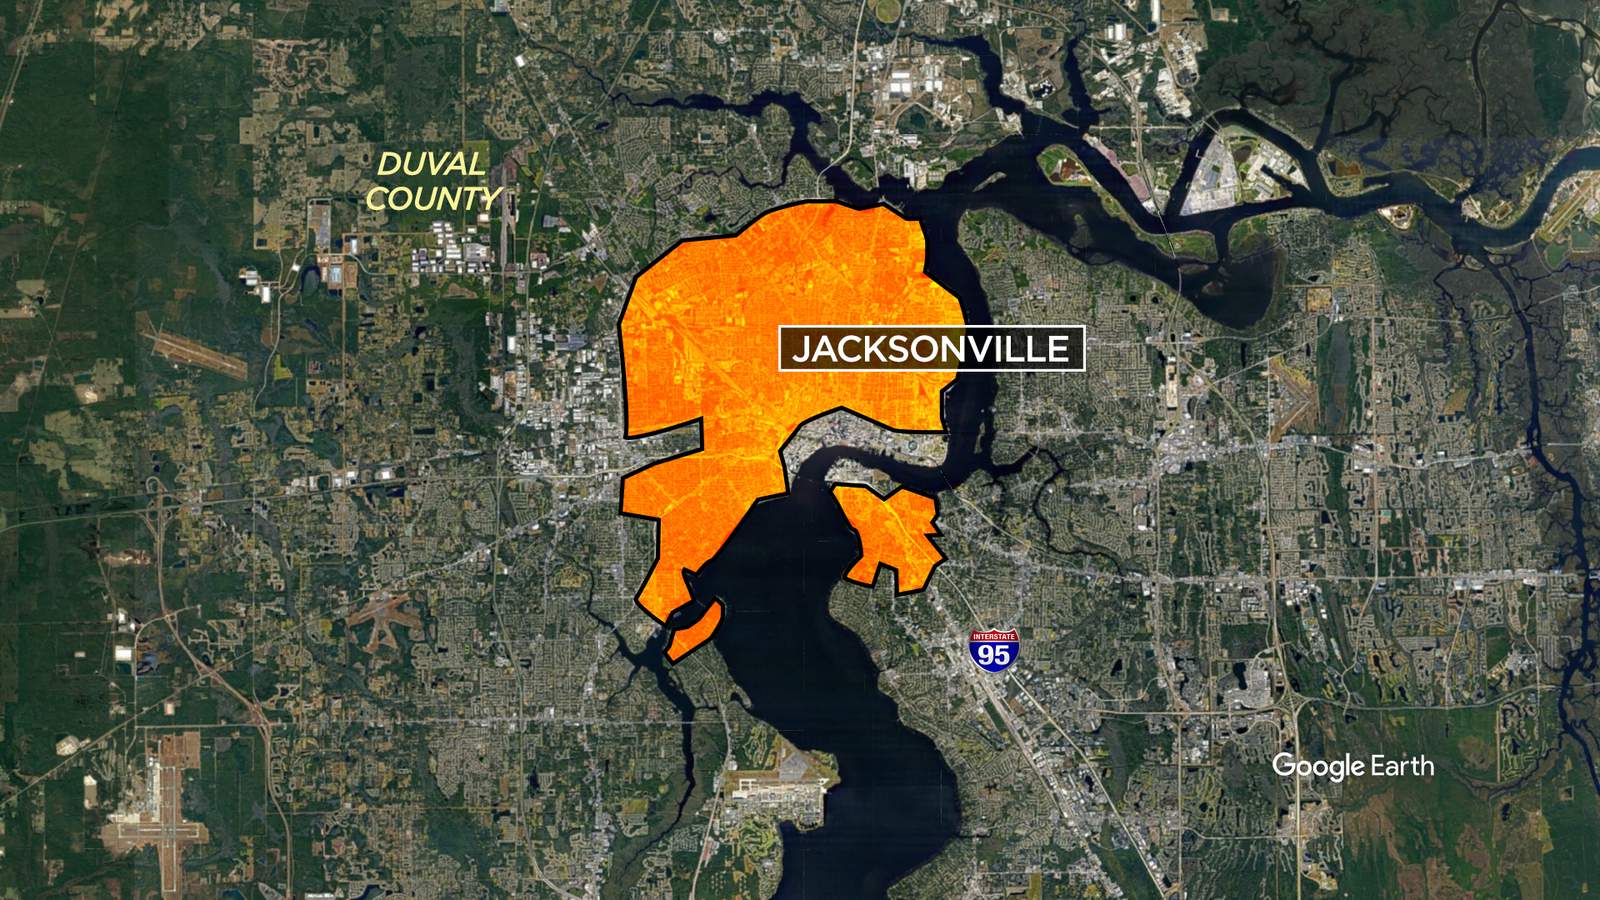 Plan would funnel portion of money for infrastructure projects to Jacksonville’s core